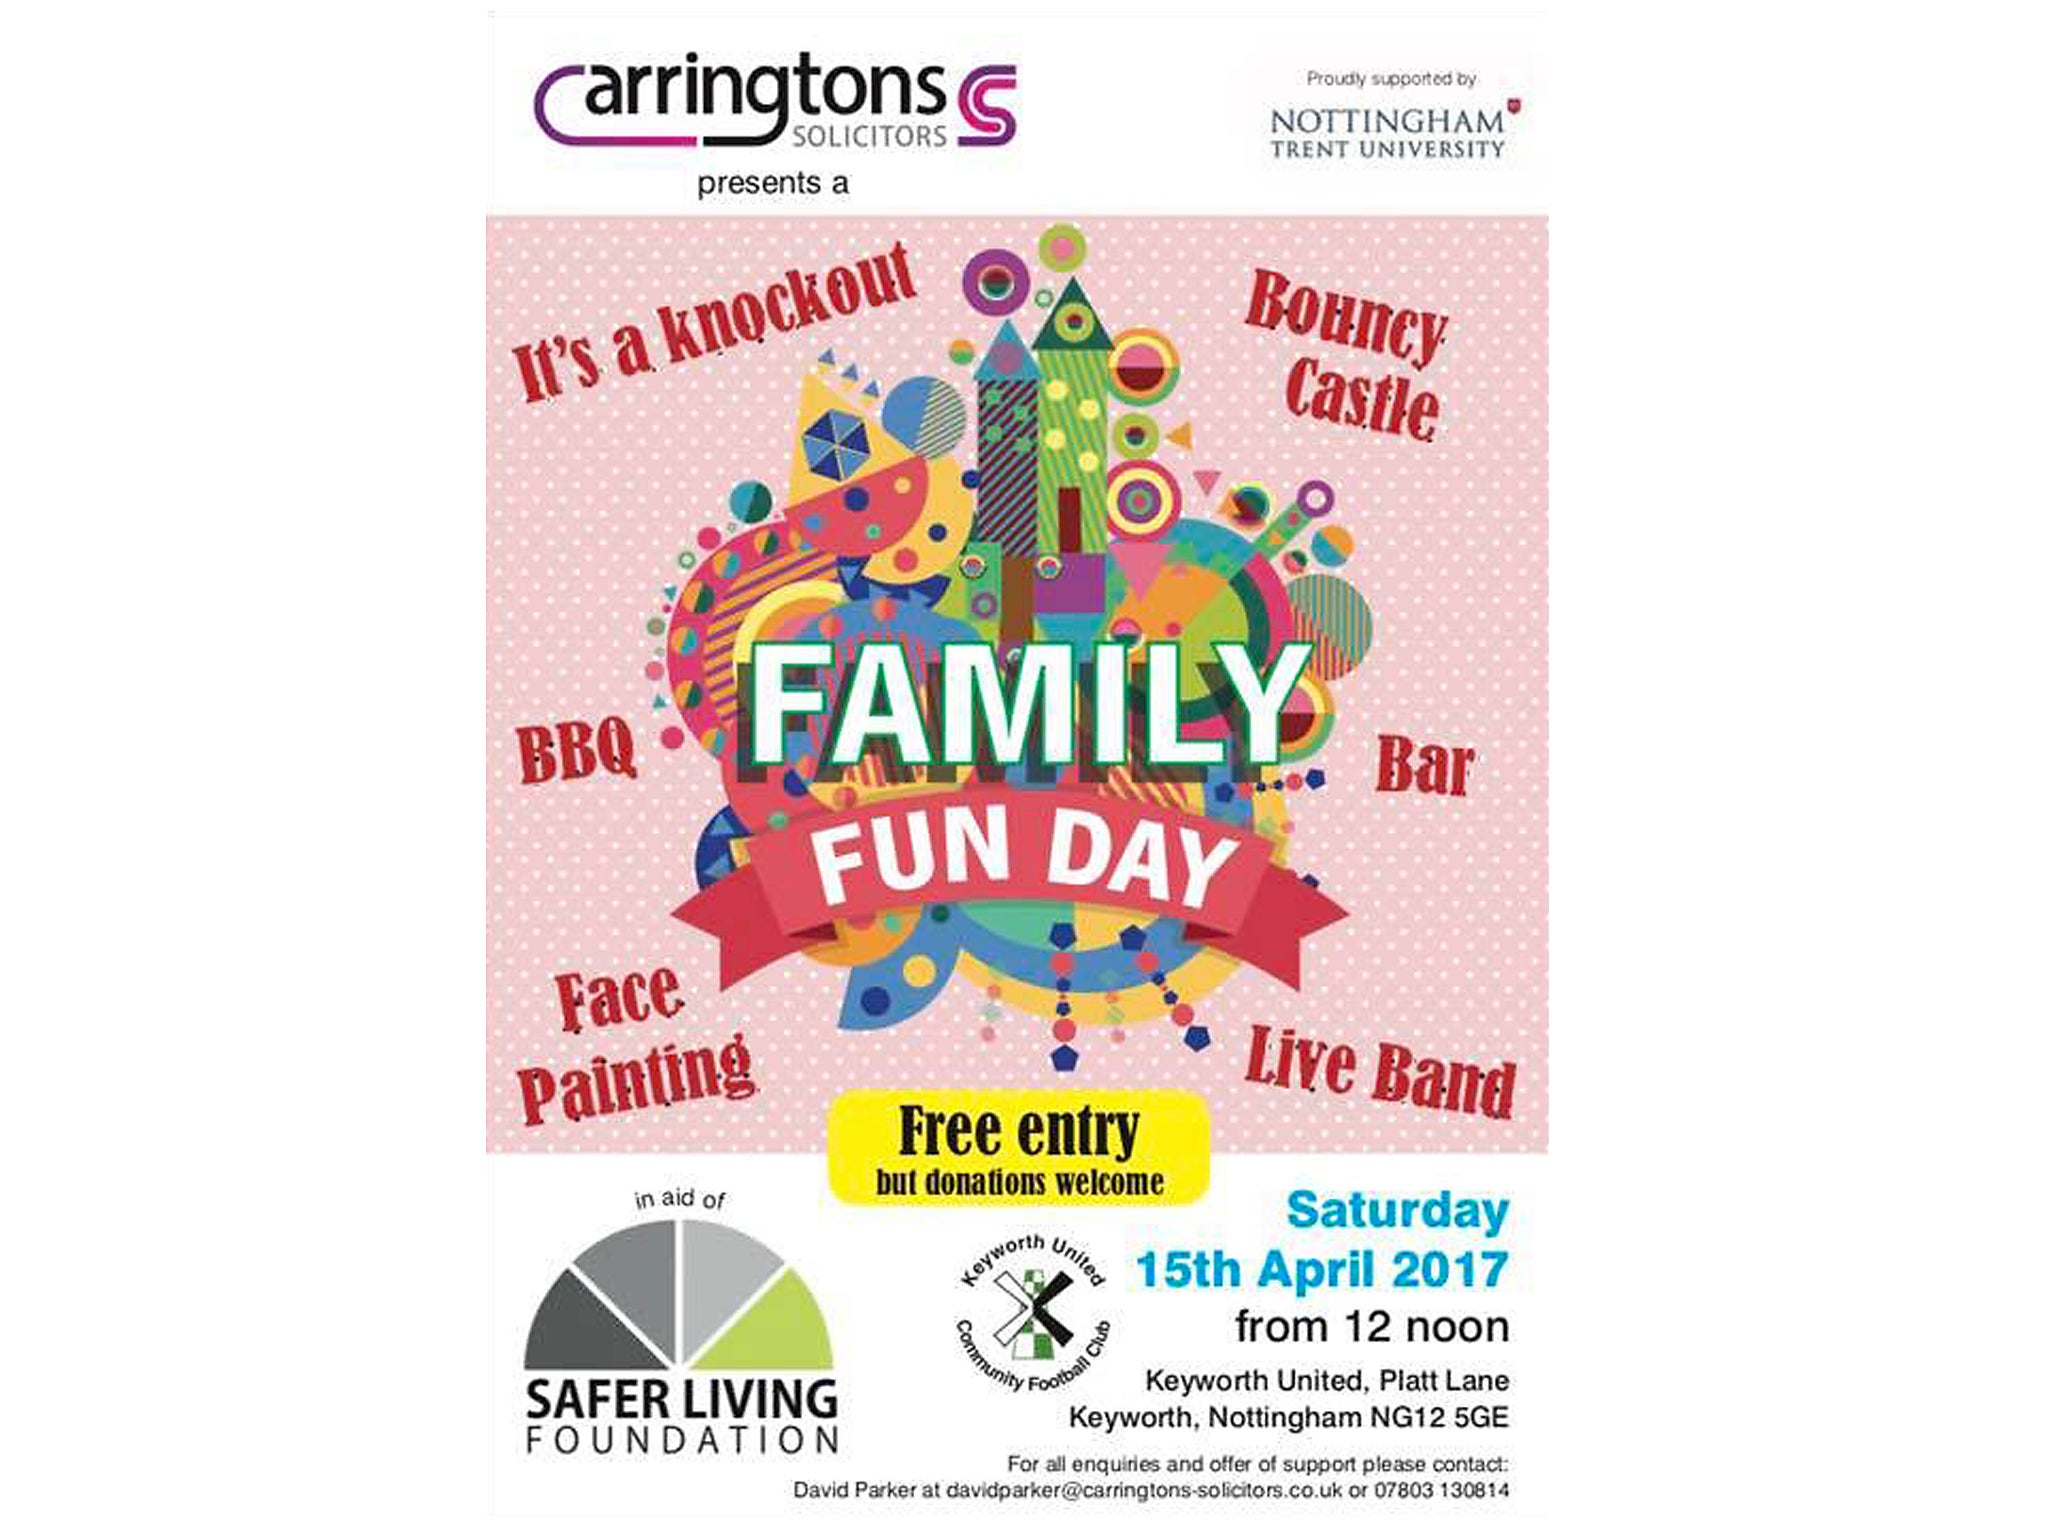 The poster for the fun day states that it is in aid of the Safer Living Foundation, but not the nature of the work the charity does